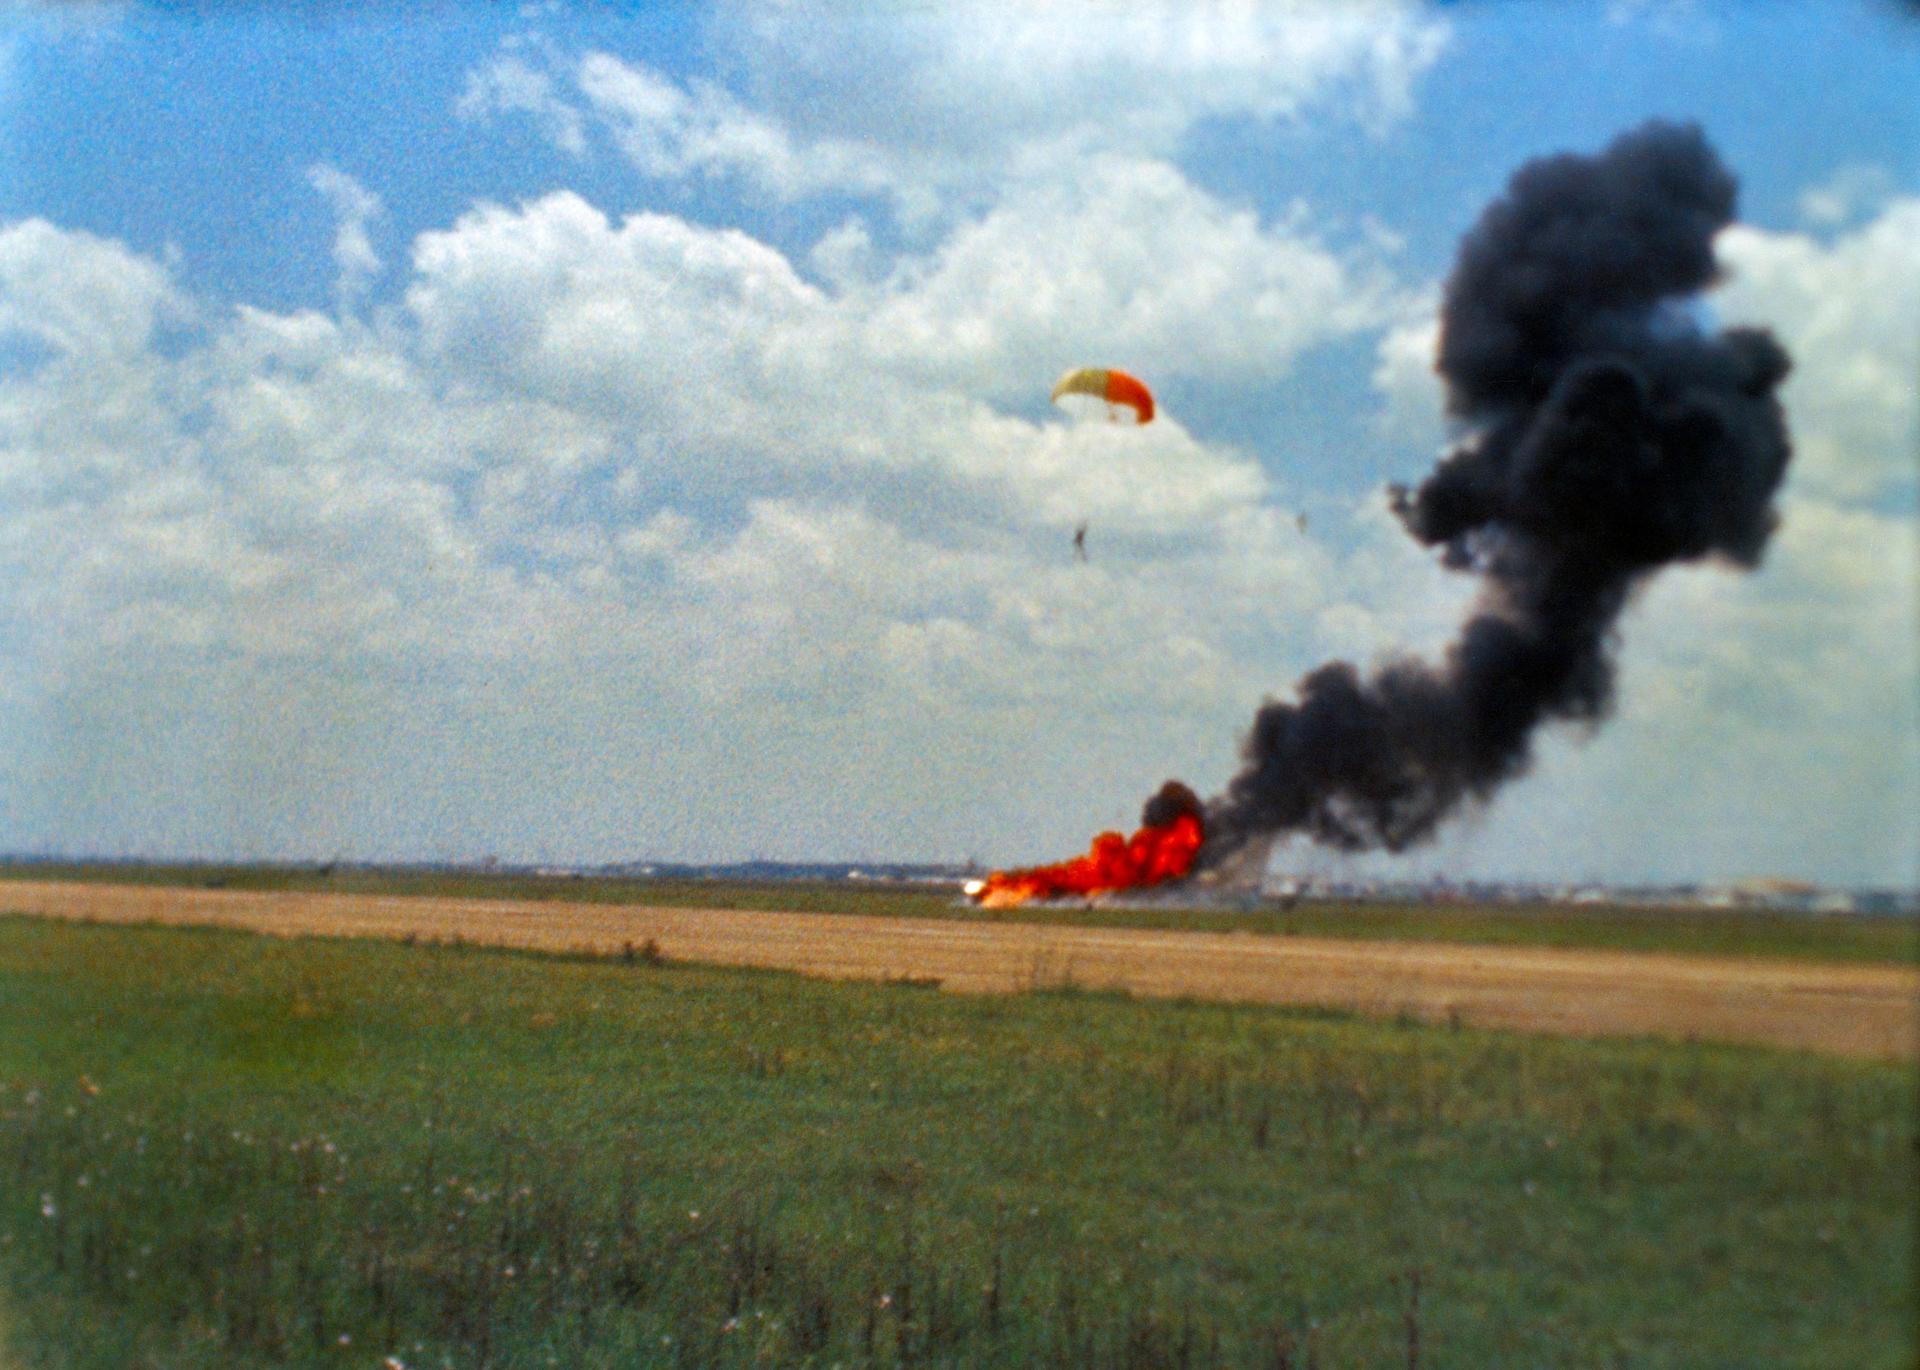 An airfield is shown with Neil Armstrong and his parachute landing.